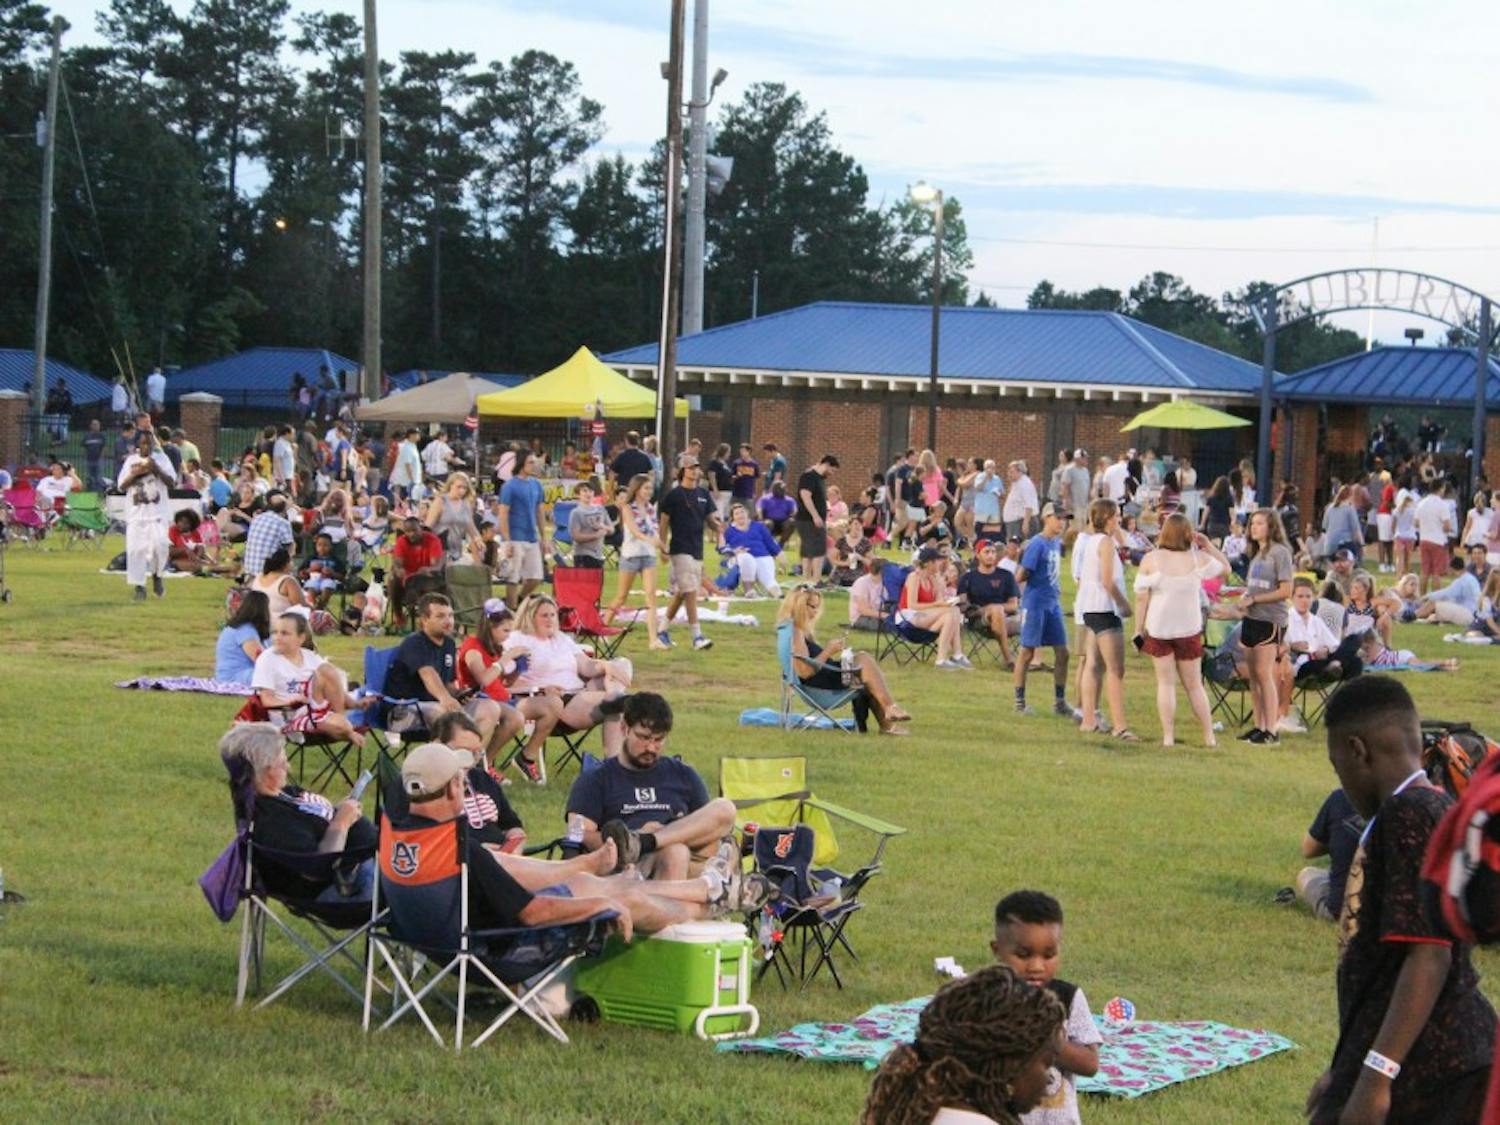 Members of the Auburn community enjoying the festivities at the annual Independence Day Celebration on July 4, 2018, in Auburn, Ala.&nbsp;